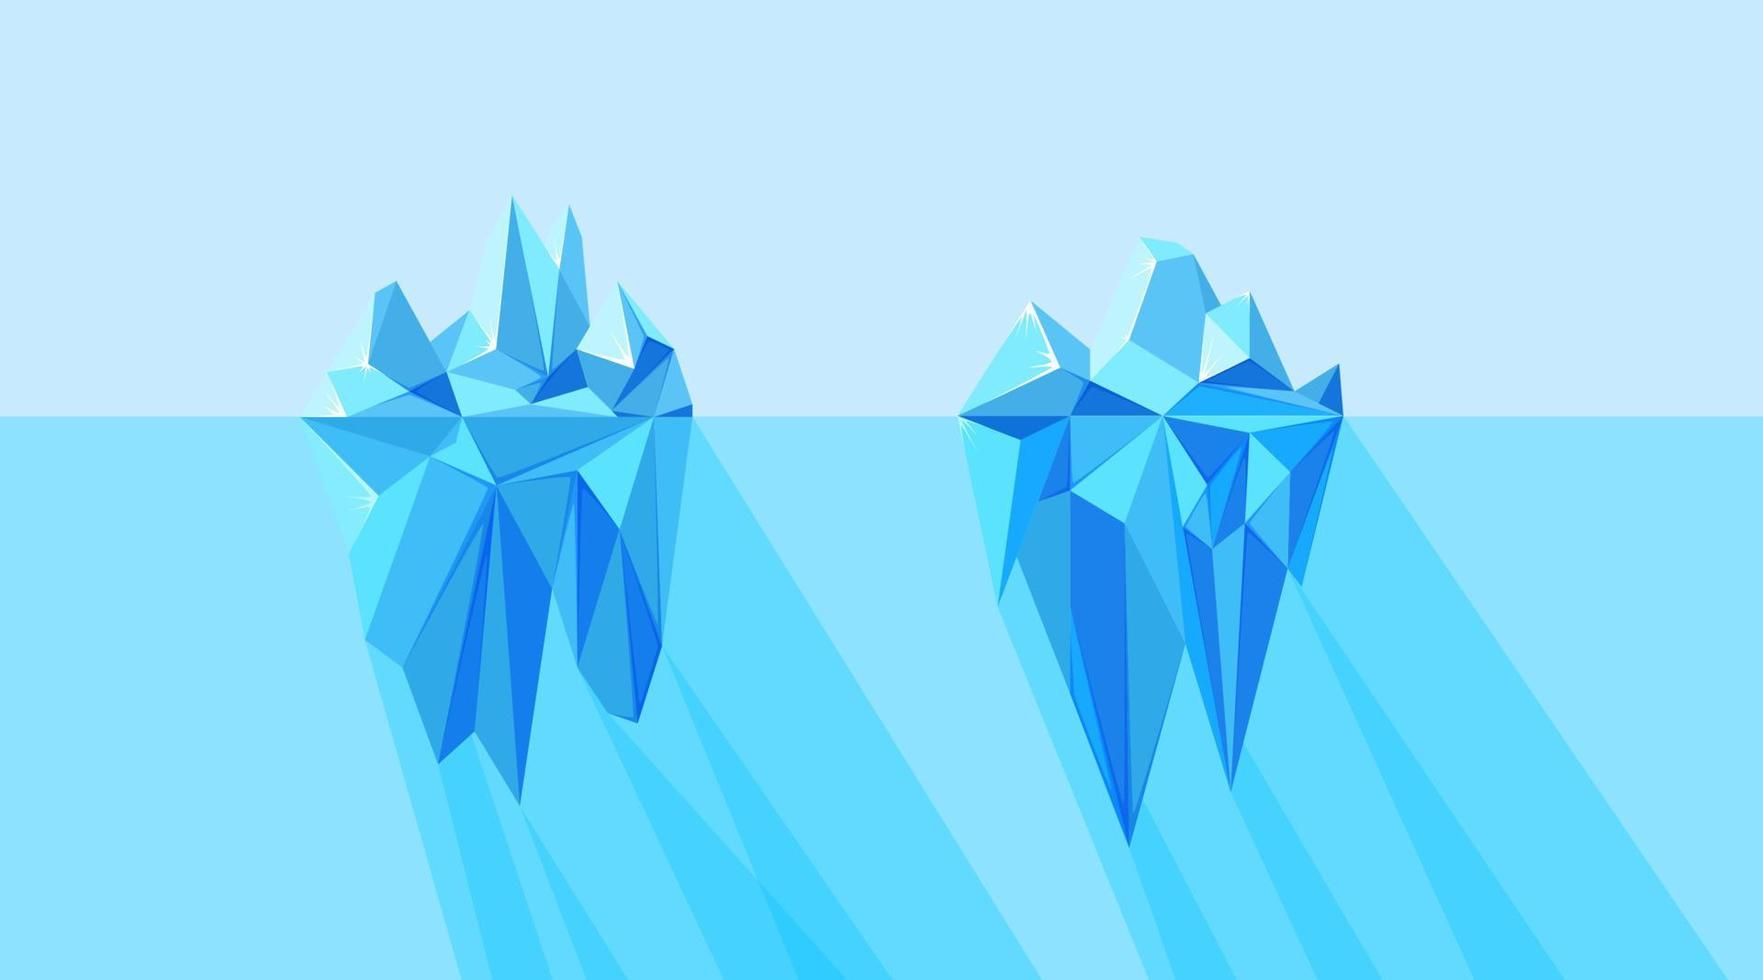 Icebergs visible and hidden parts floating in the arctic sea. North landscape with polygonal geometric iceberg. Vector illustration